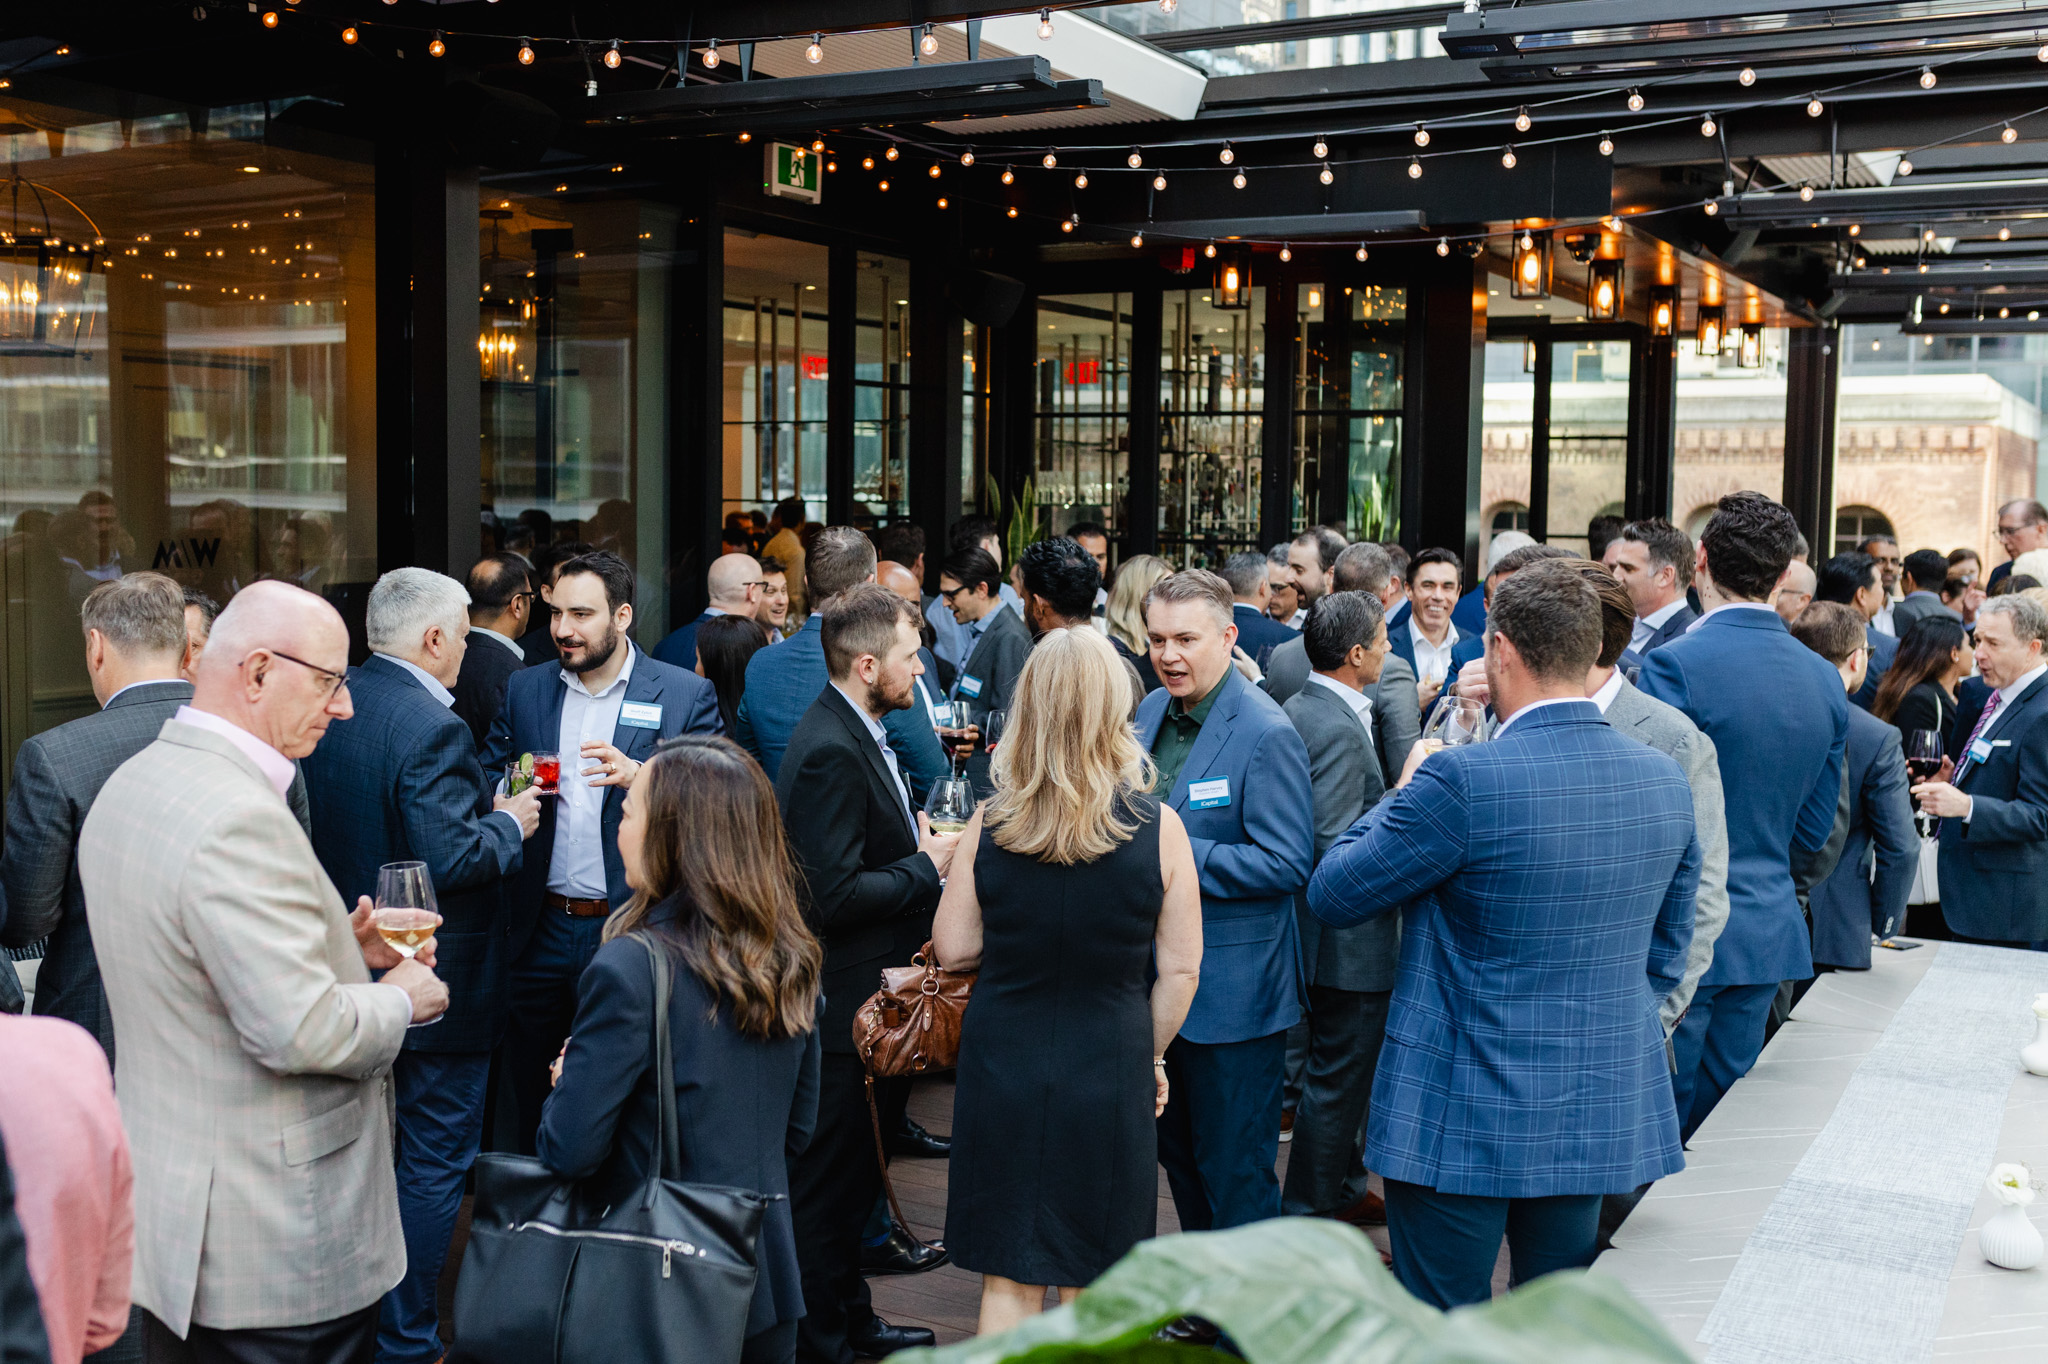 A large group of people in formal attire engage in conversation at an outdoor networking event, with string lights overhead and city buildings visible in the background—a perfect scene for corporate photography.